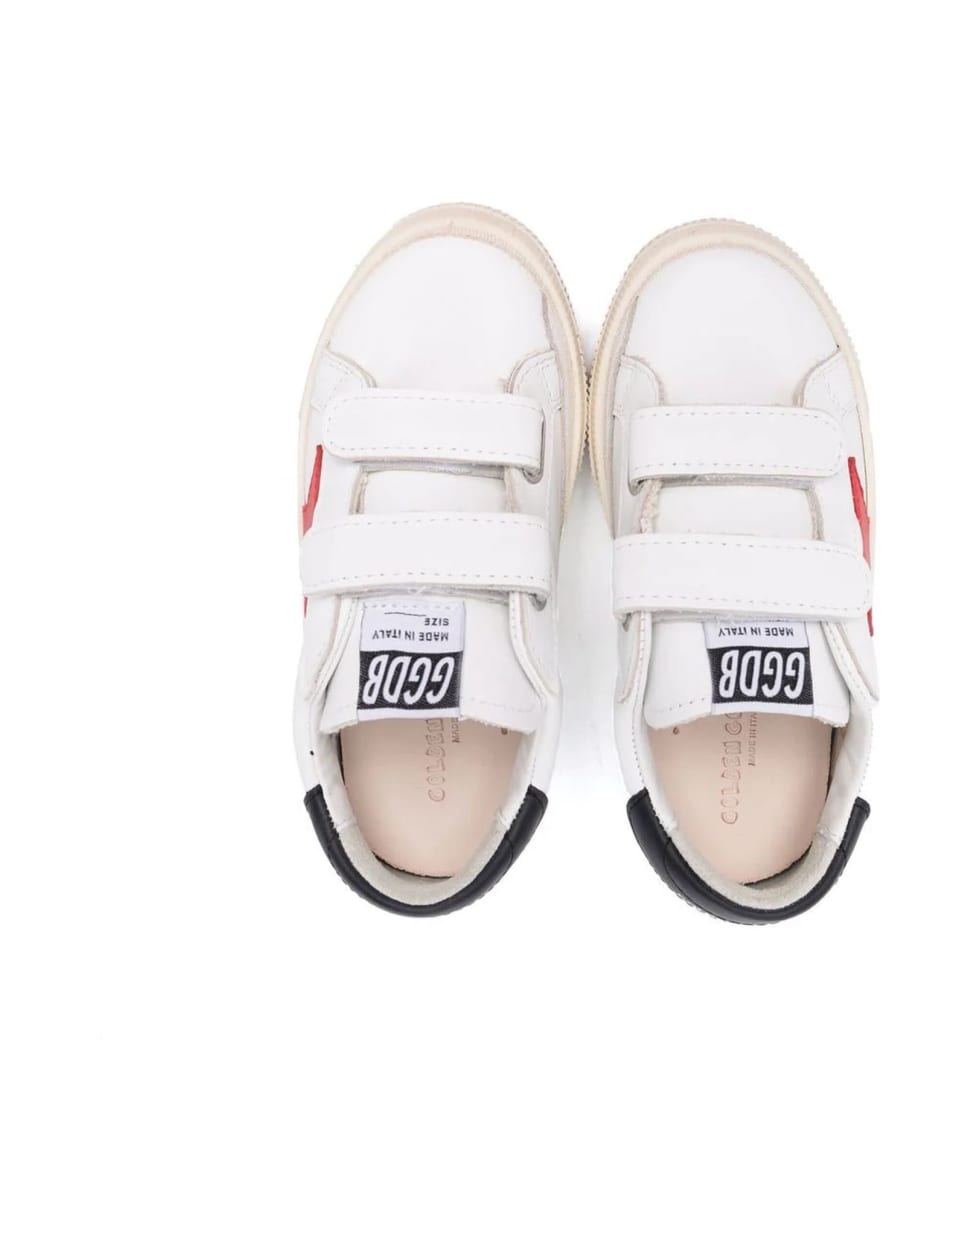 Golden Goose White Leather Old Skool Sneakers - Bianco+rosso